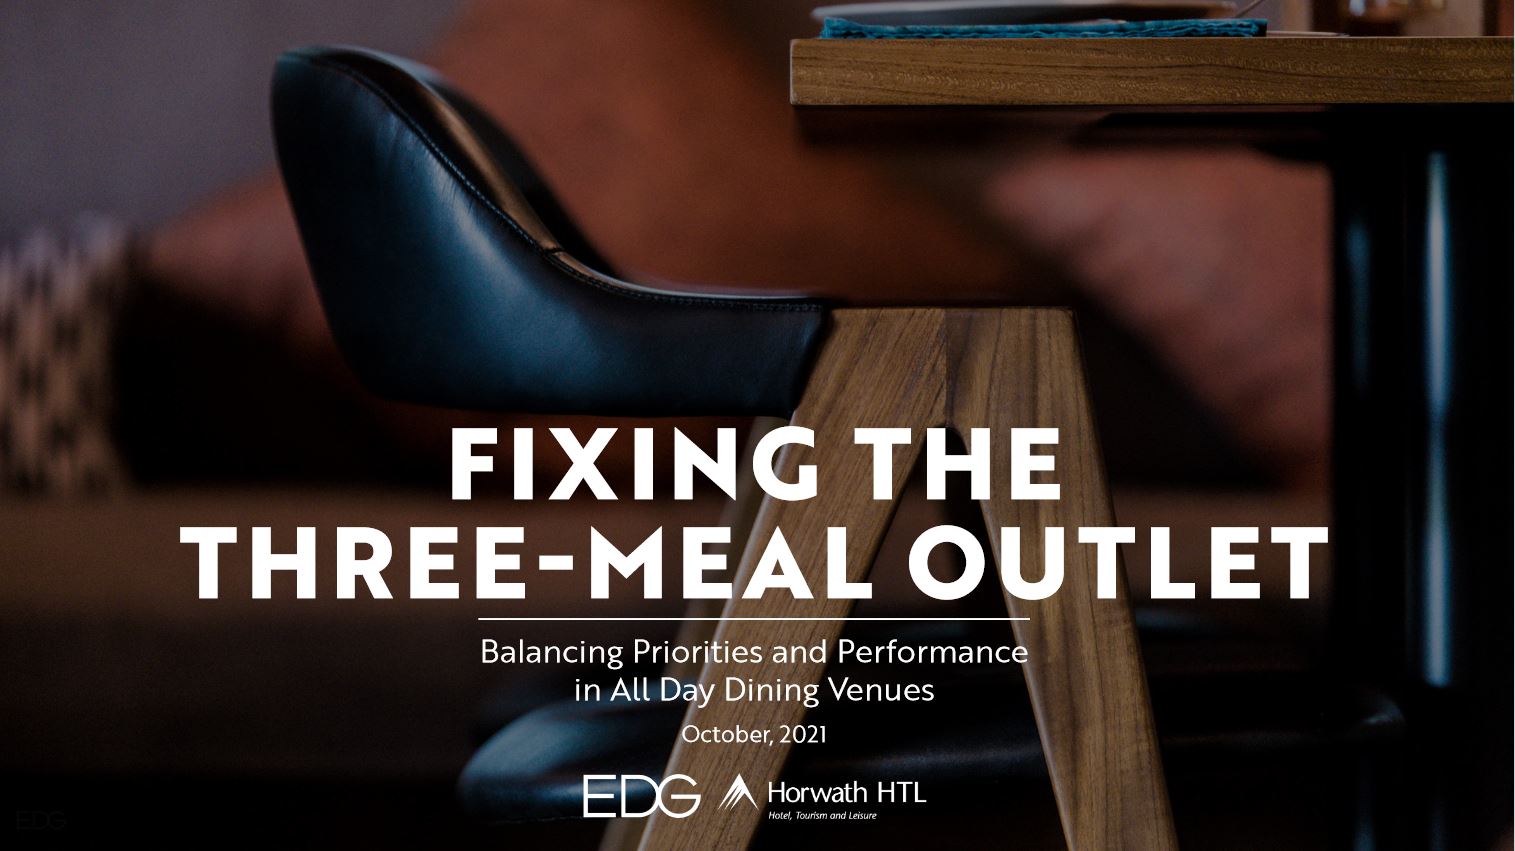 Fixing the Three-Meal Outlet